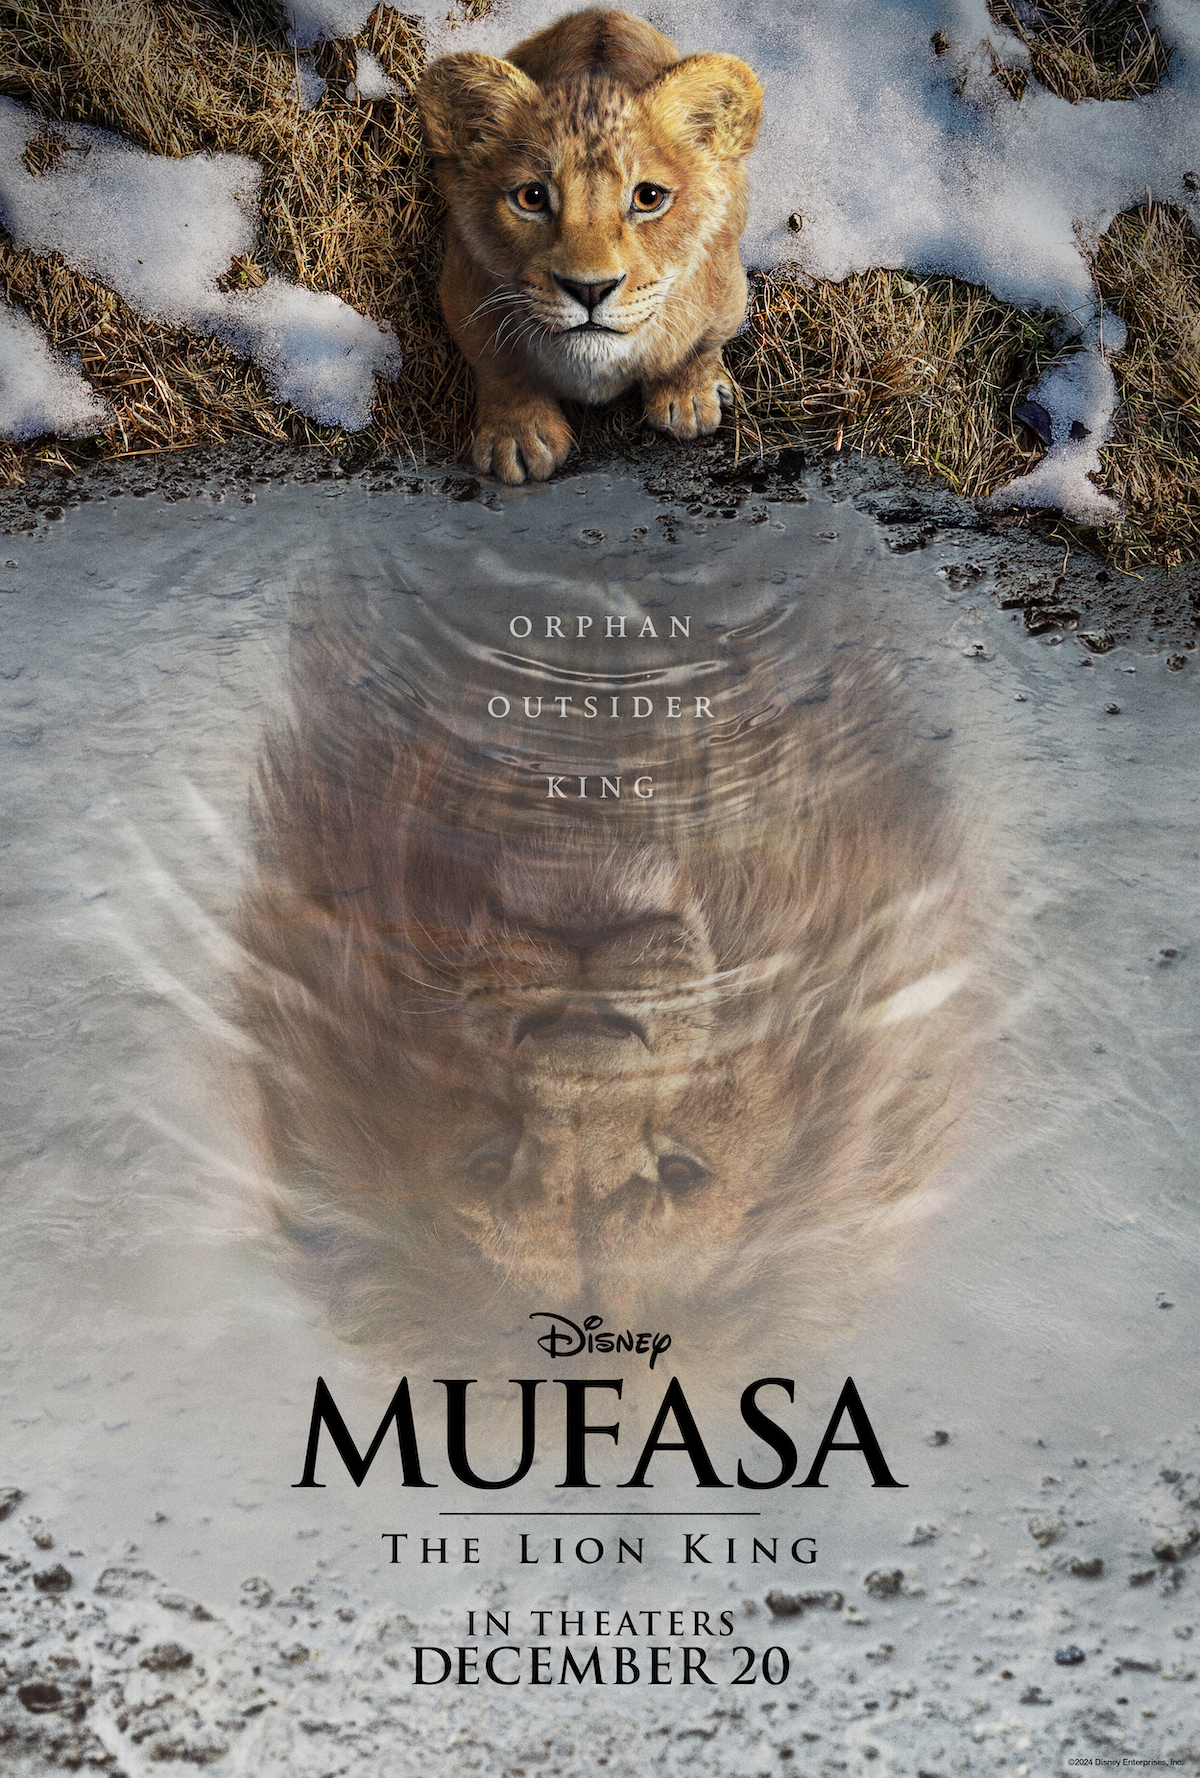 Mufasa: The Lion King Assets